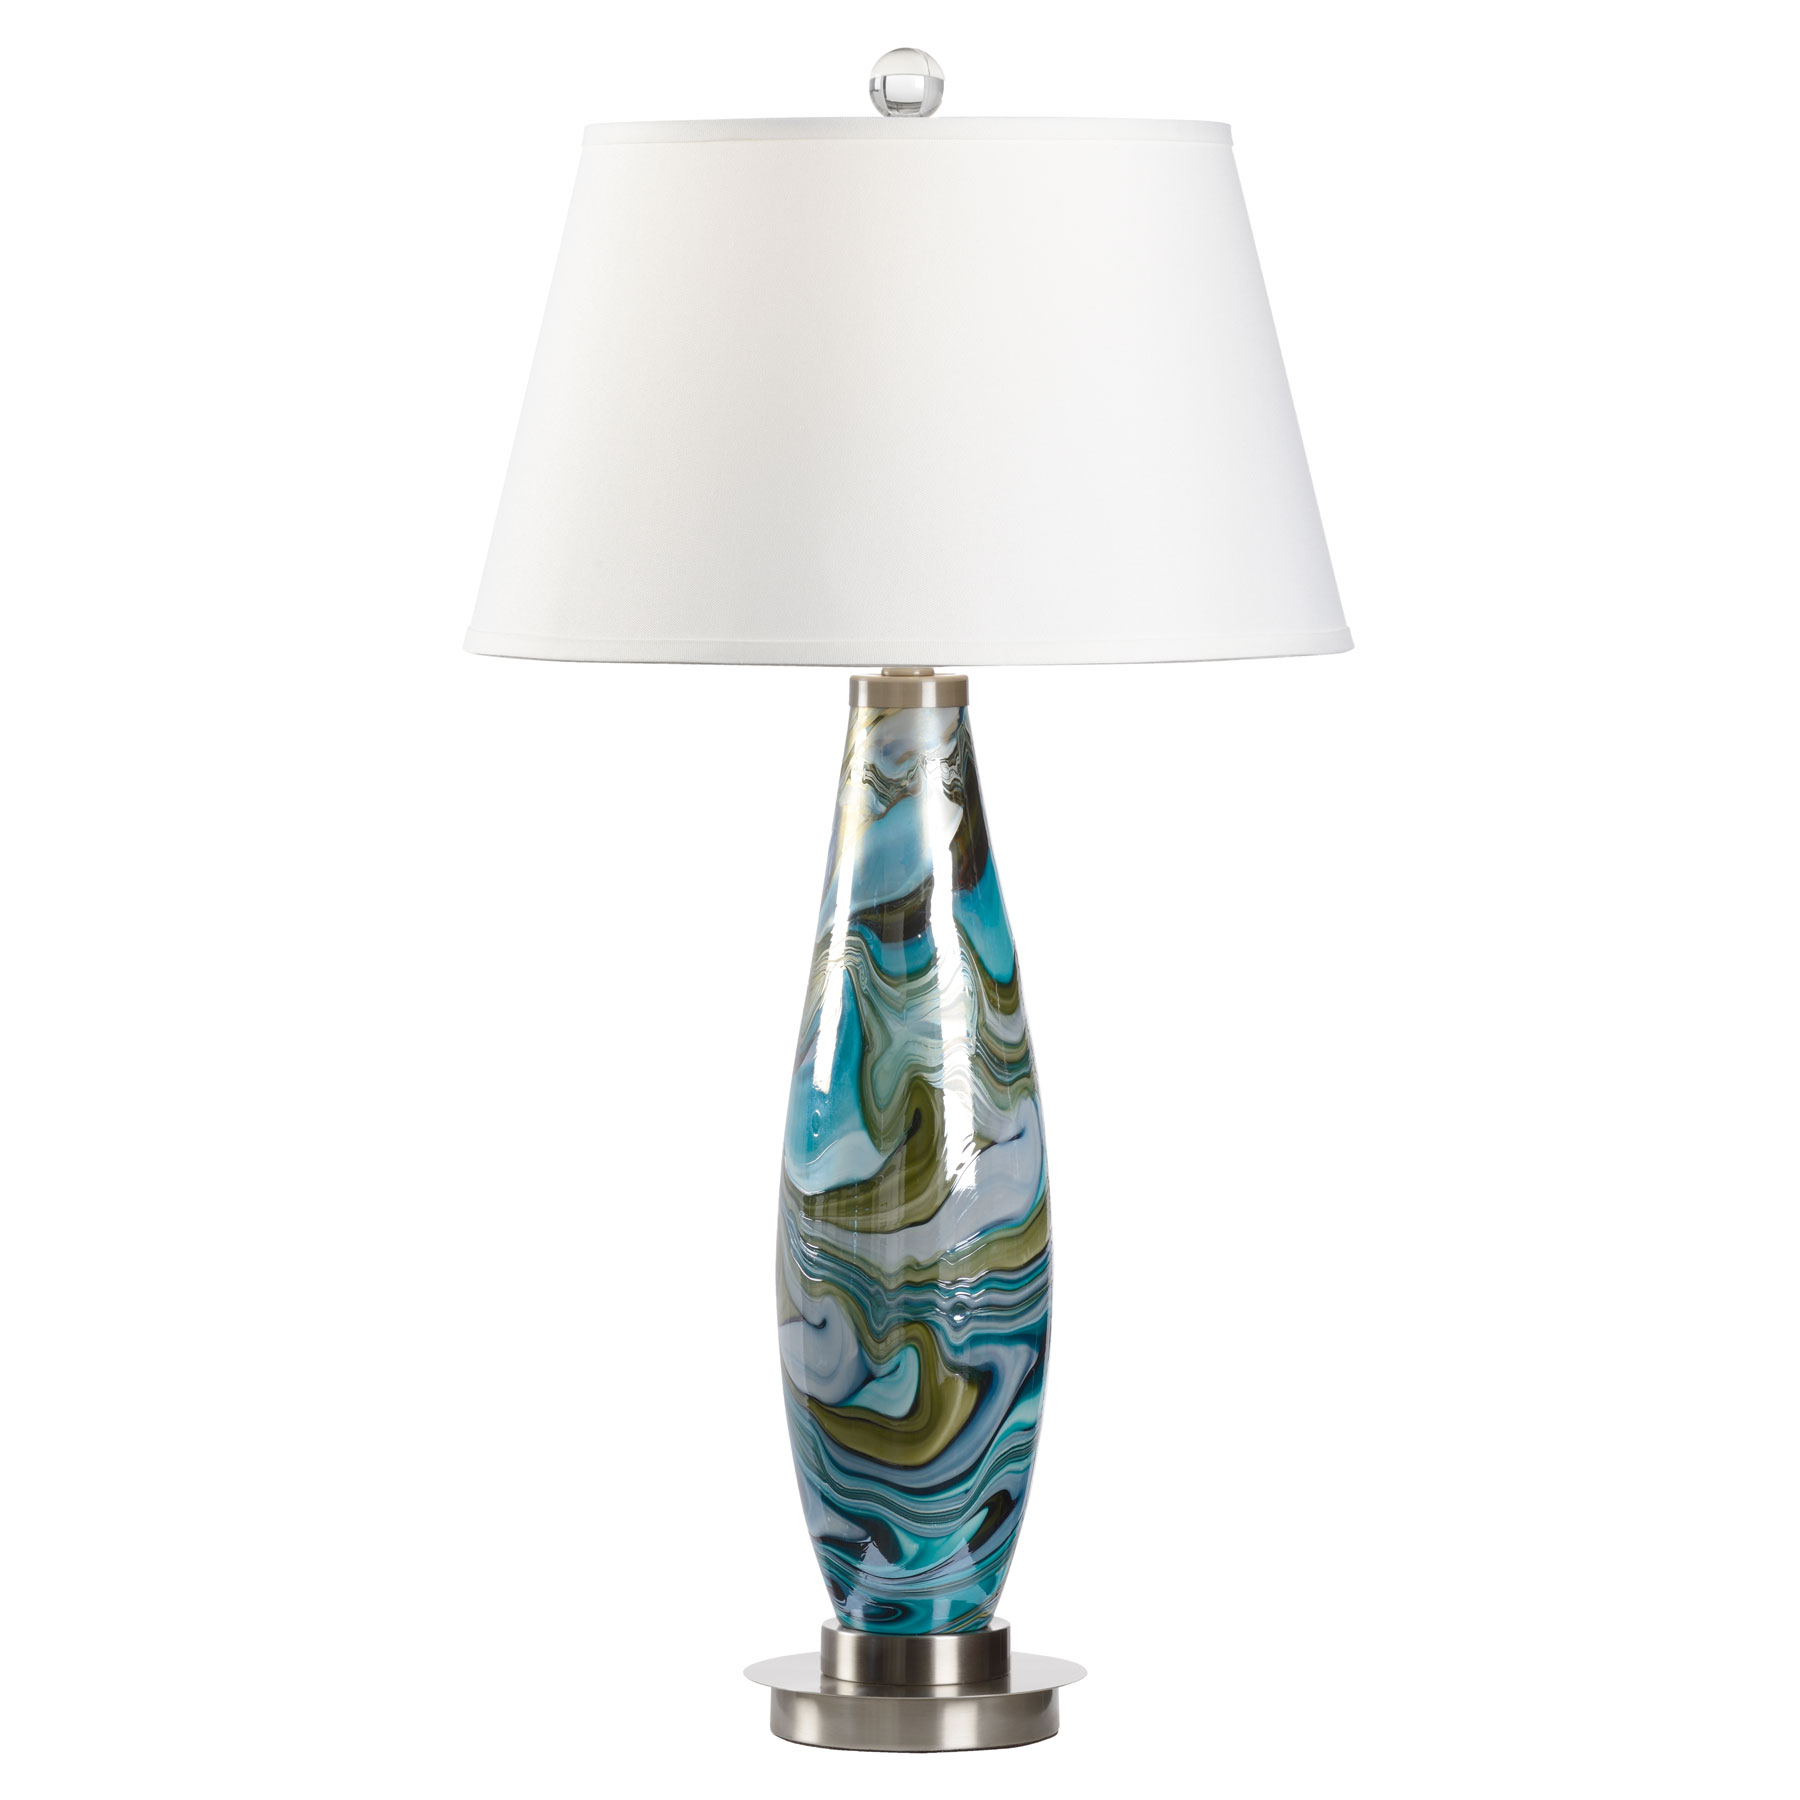 Art Glass Table Lamp Inviting Home, Azure Art Glass Table Lamps